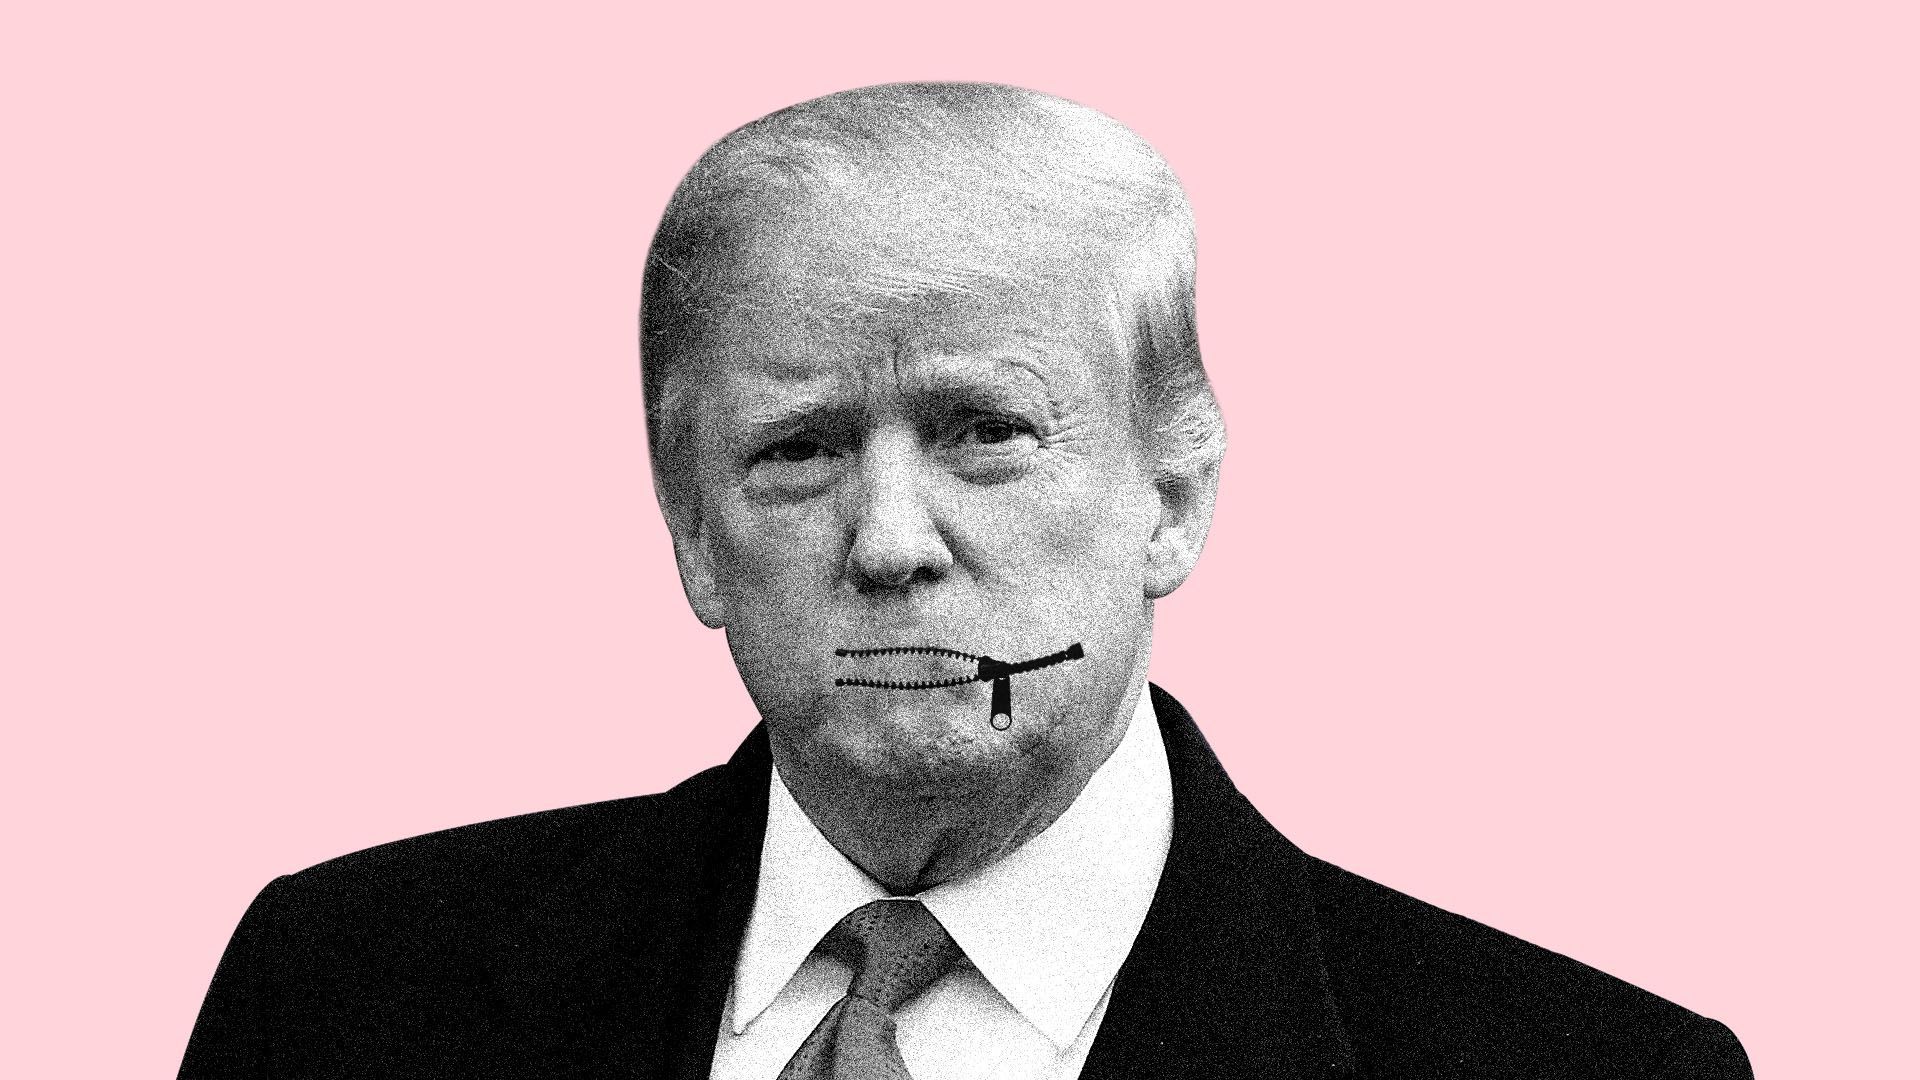 Axios illustration of President Trump's mouth zipped shut